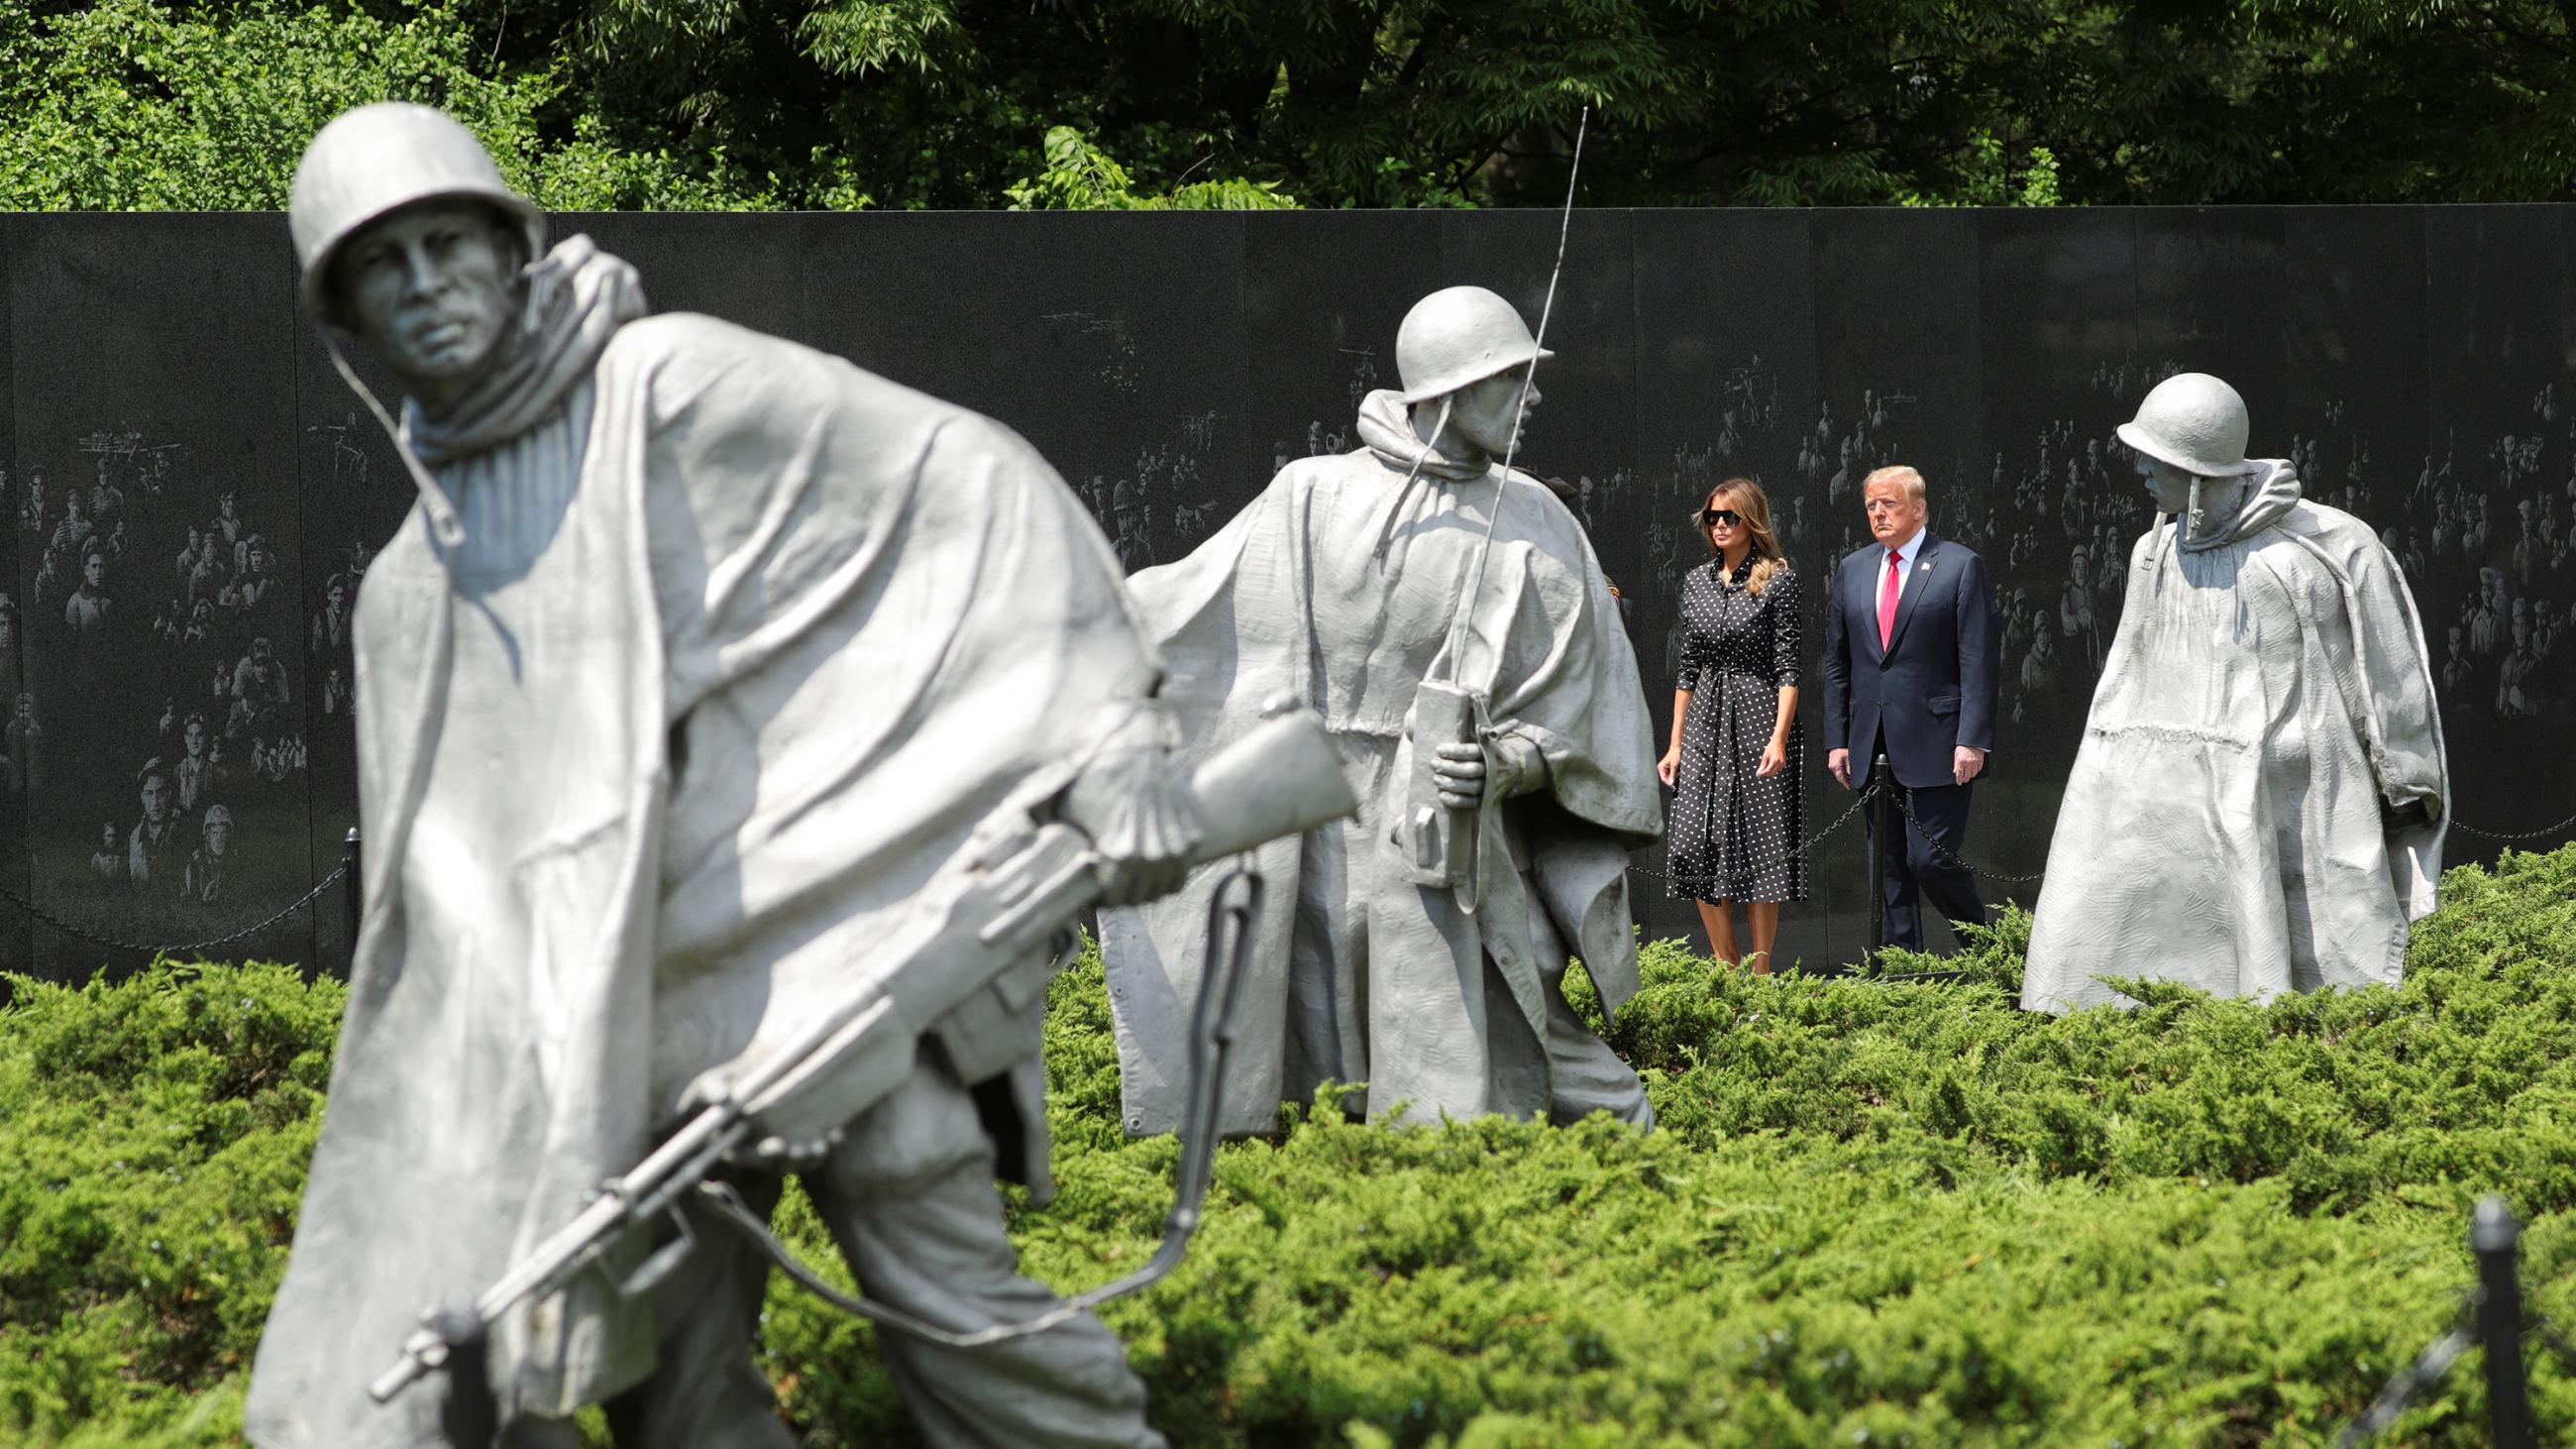 The photo shows the president and first lady shot from across the monument with statues of 1950s soldiers seen in the foreground. 